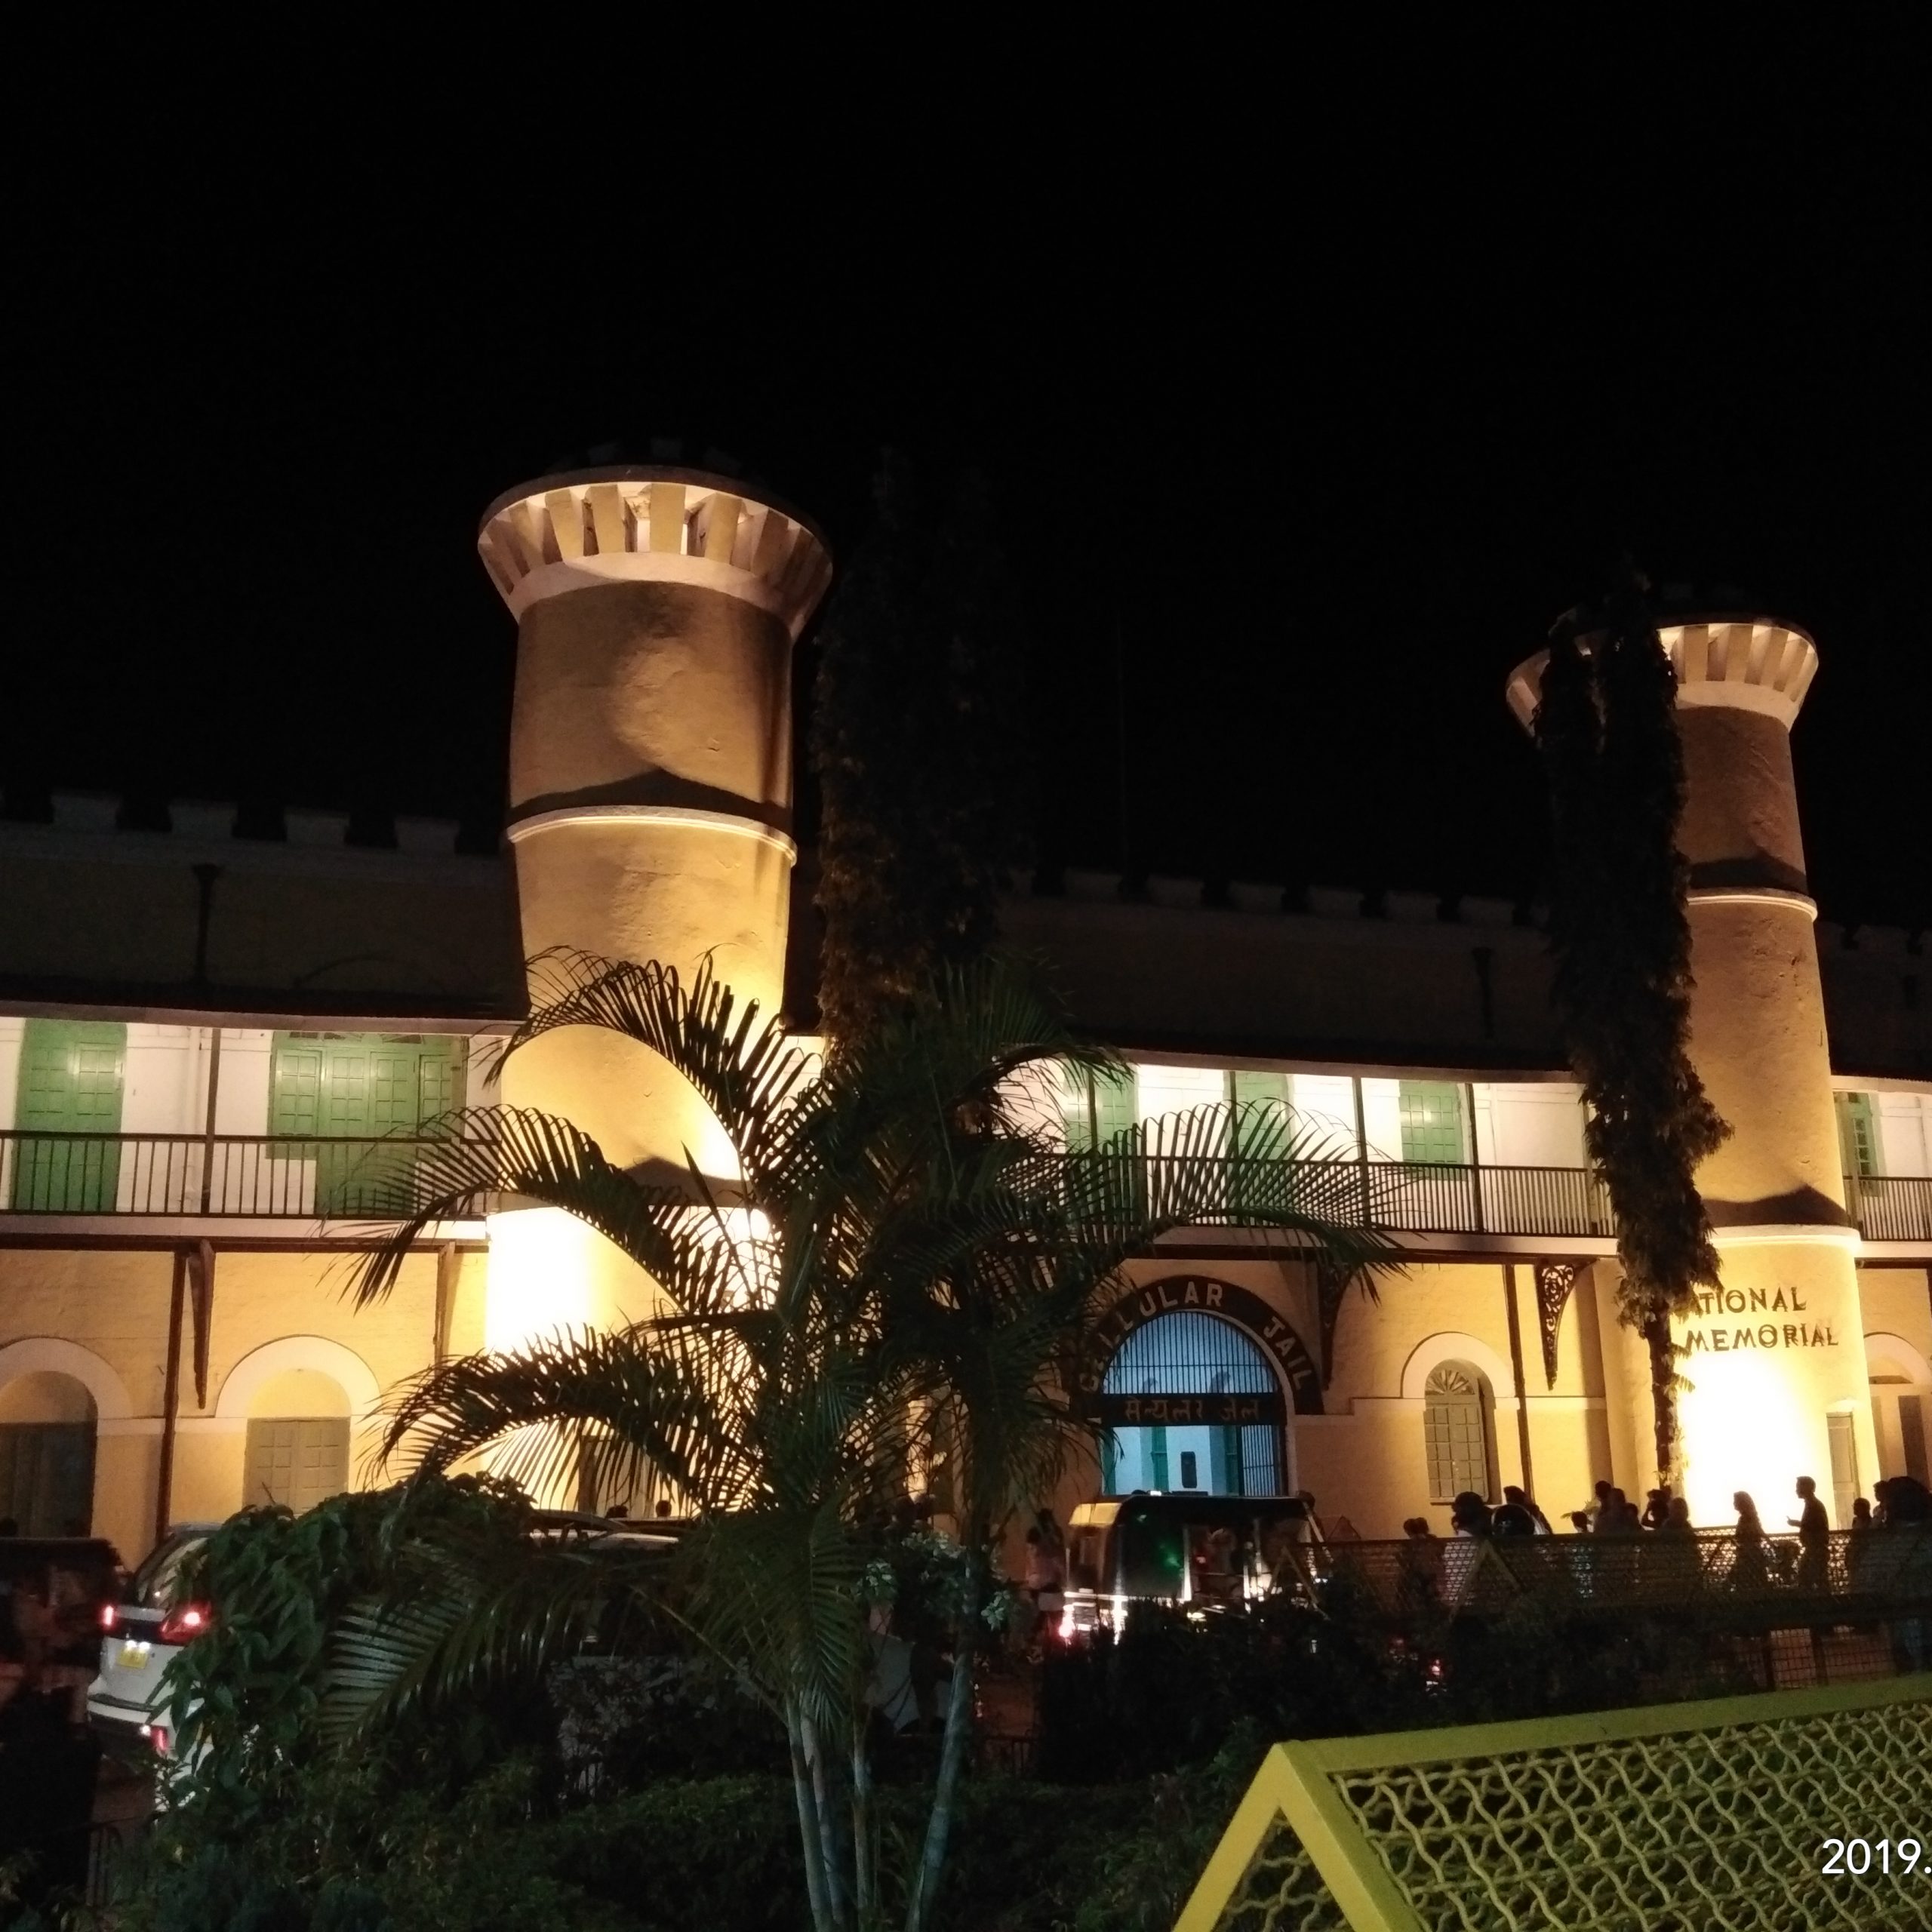 Day 1: Pickup, Cellular Jail, Corbyon's Beach, Sound and Light Show